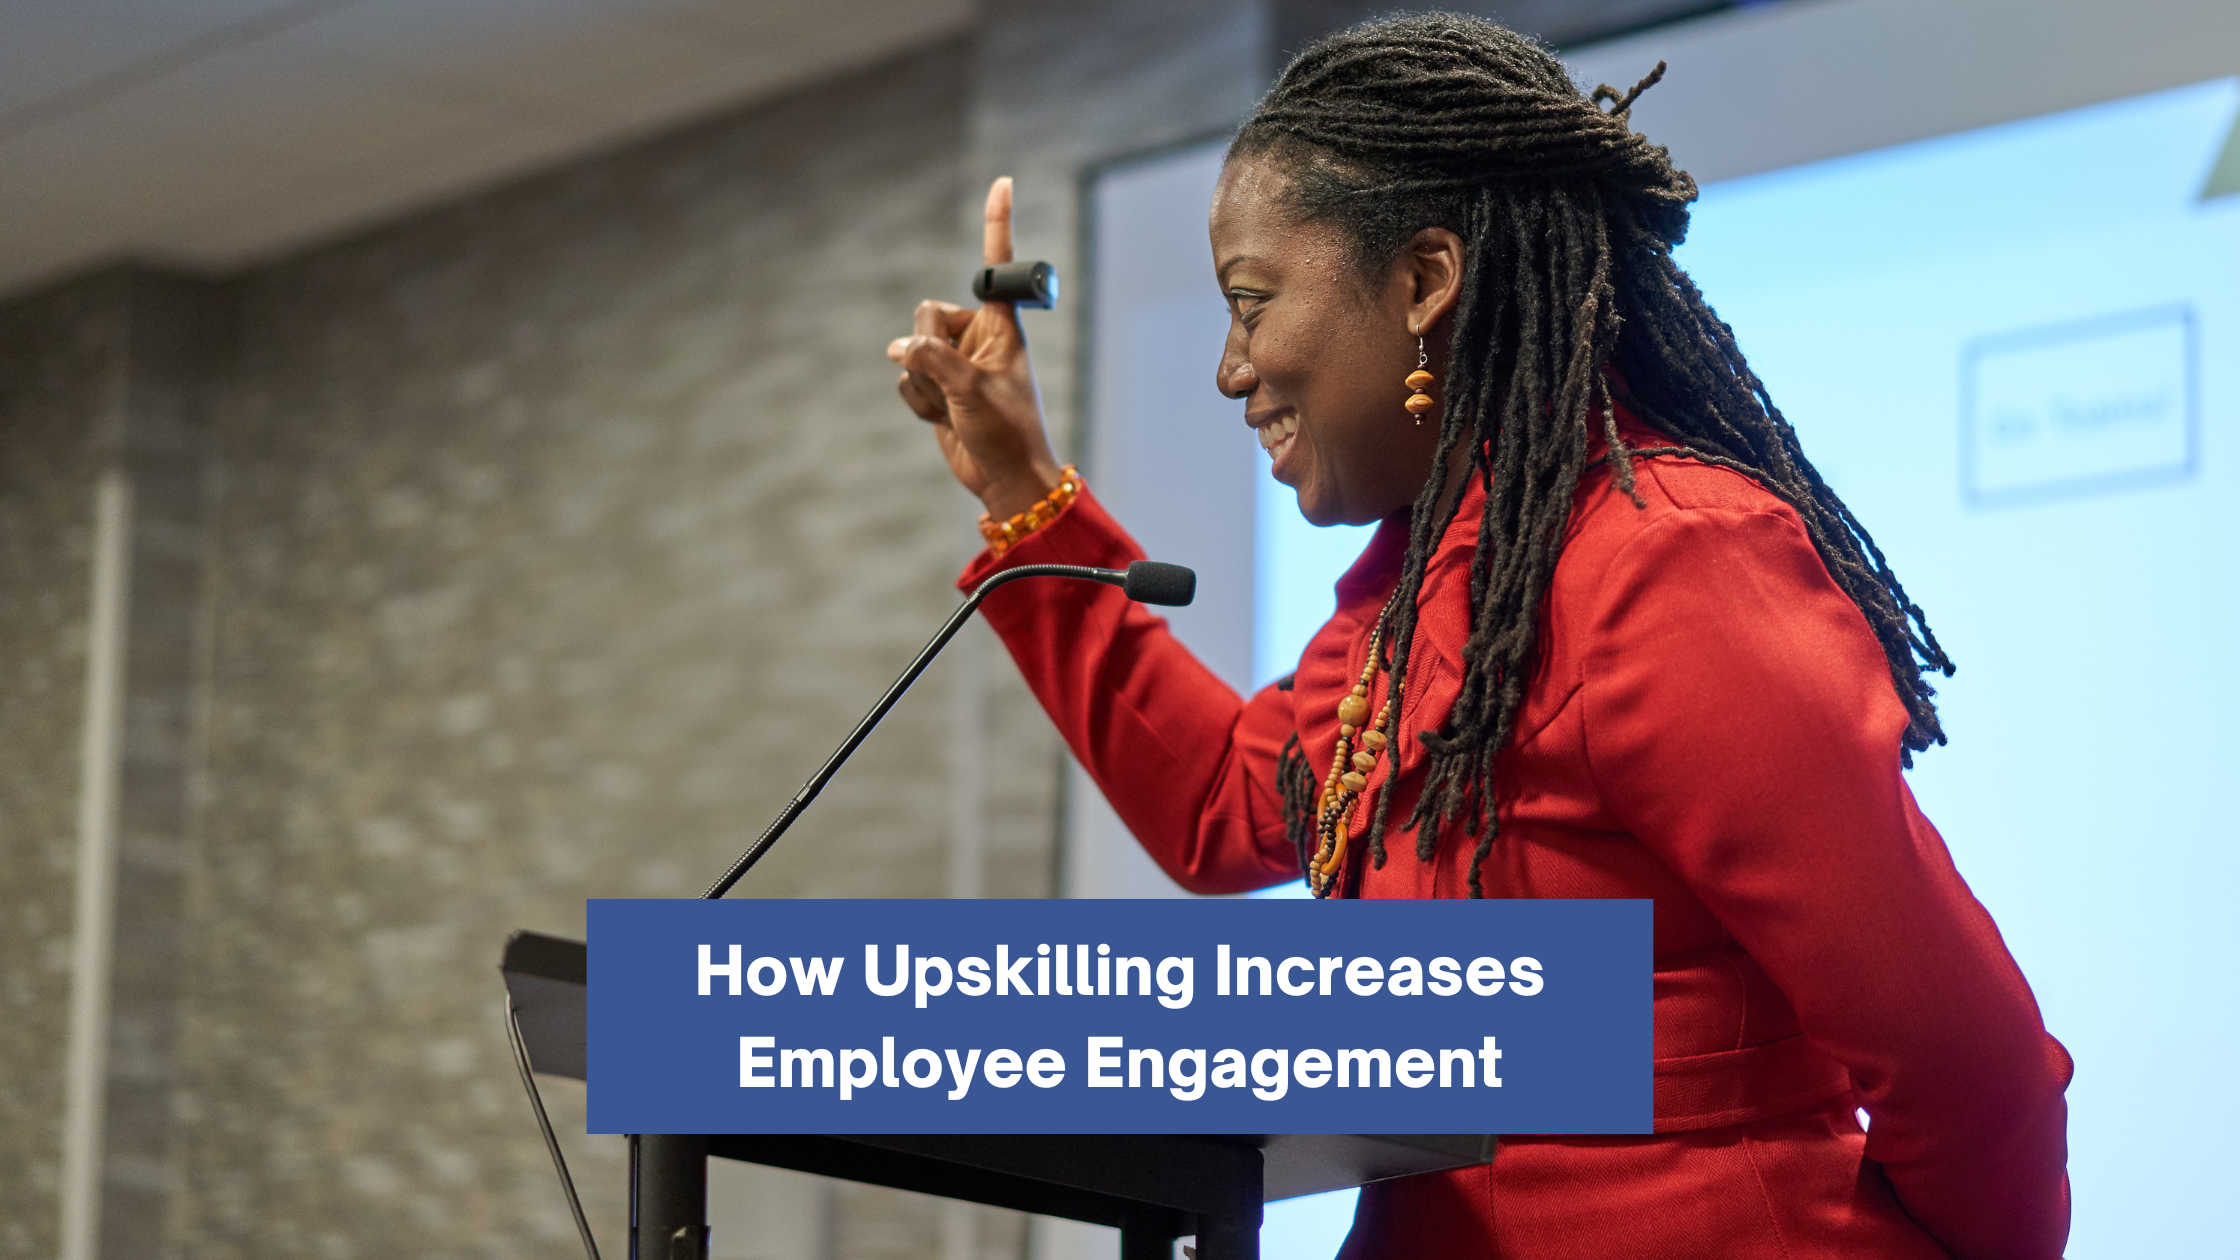 How Upskilling Increases Employee Engagement